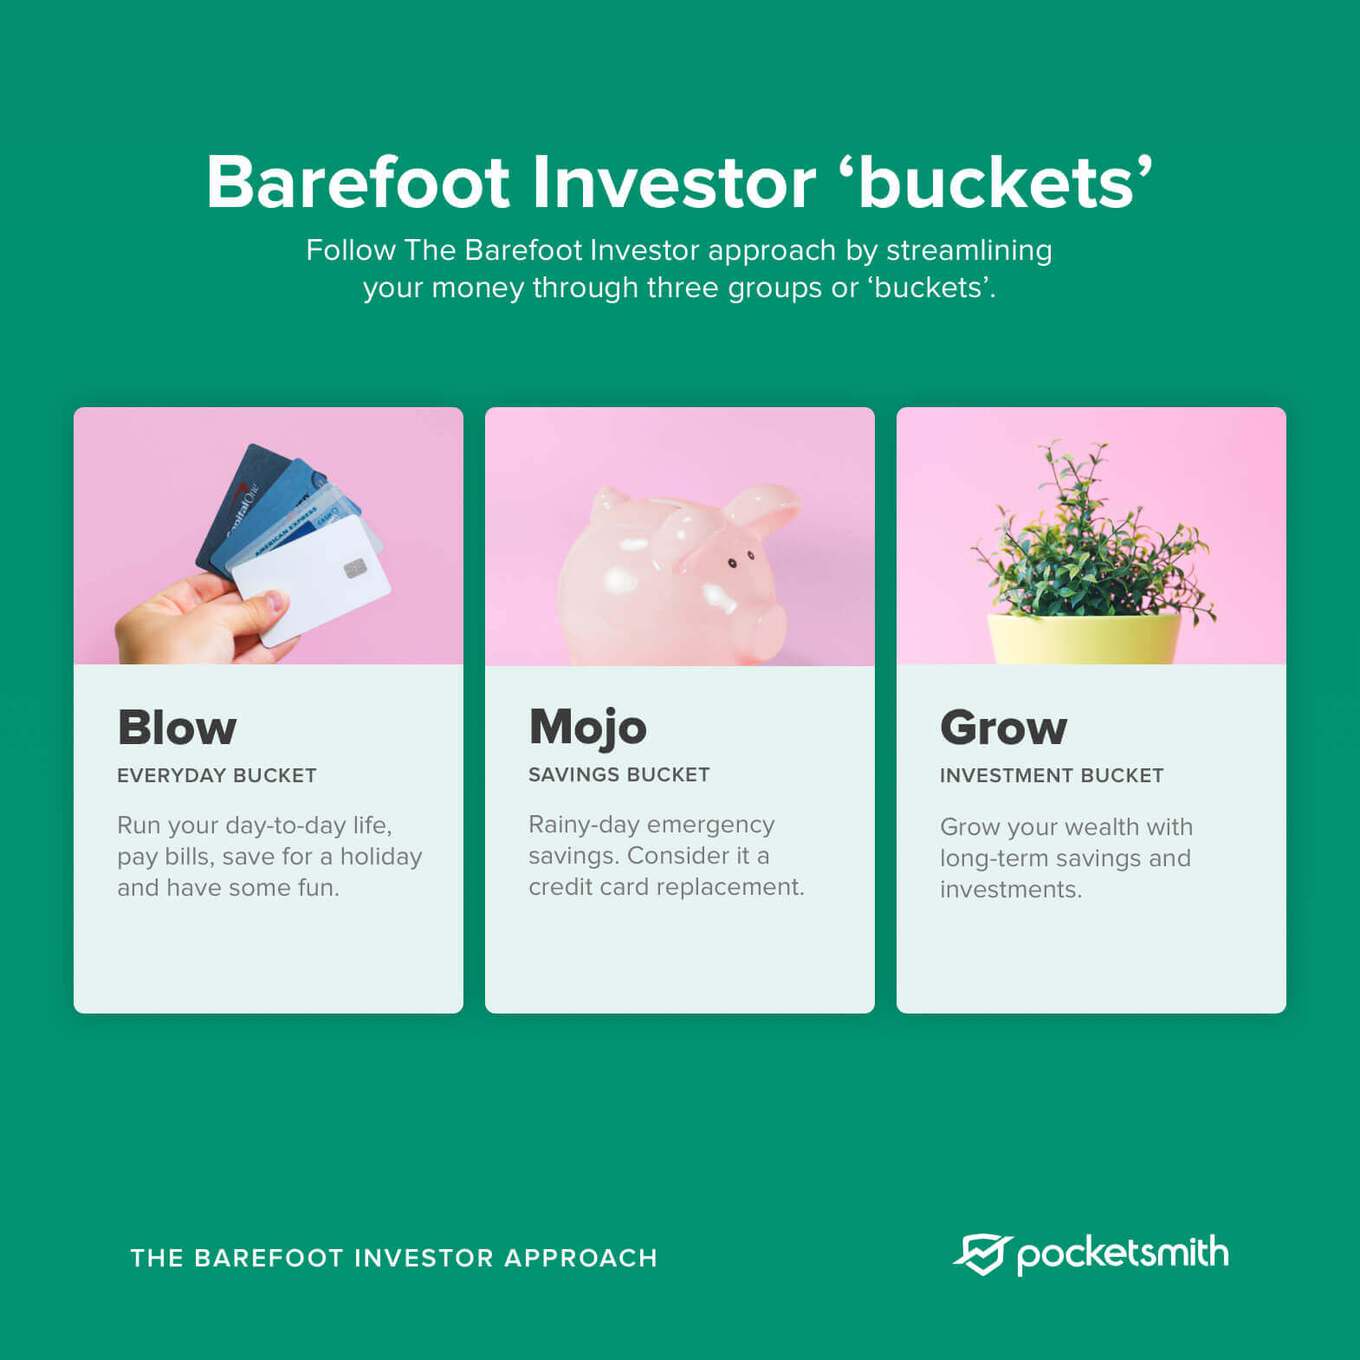 The Barefoot Investor 'Buckets' and 'Accounts' explained